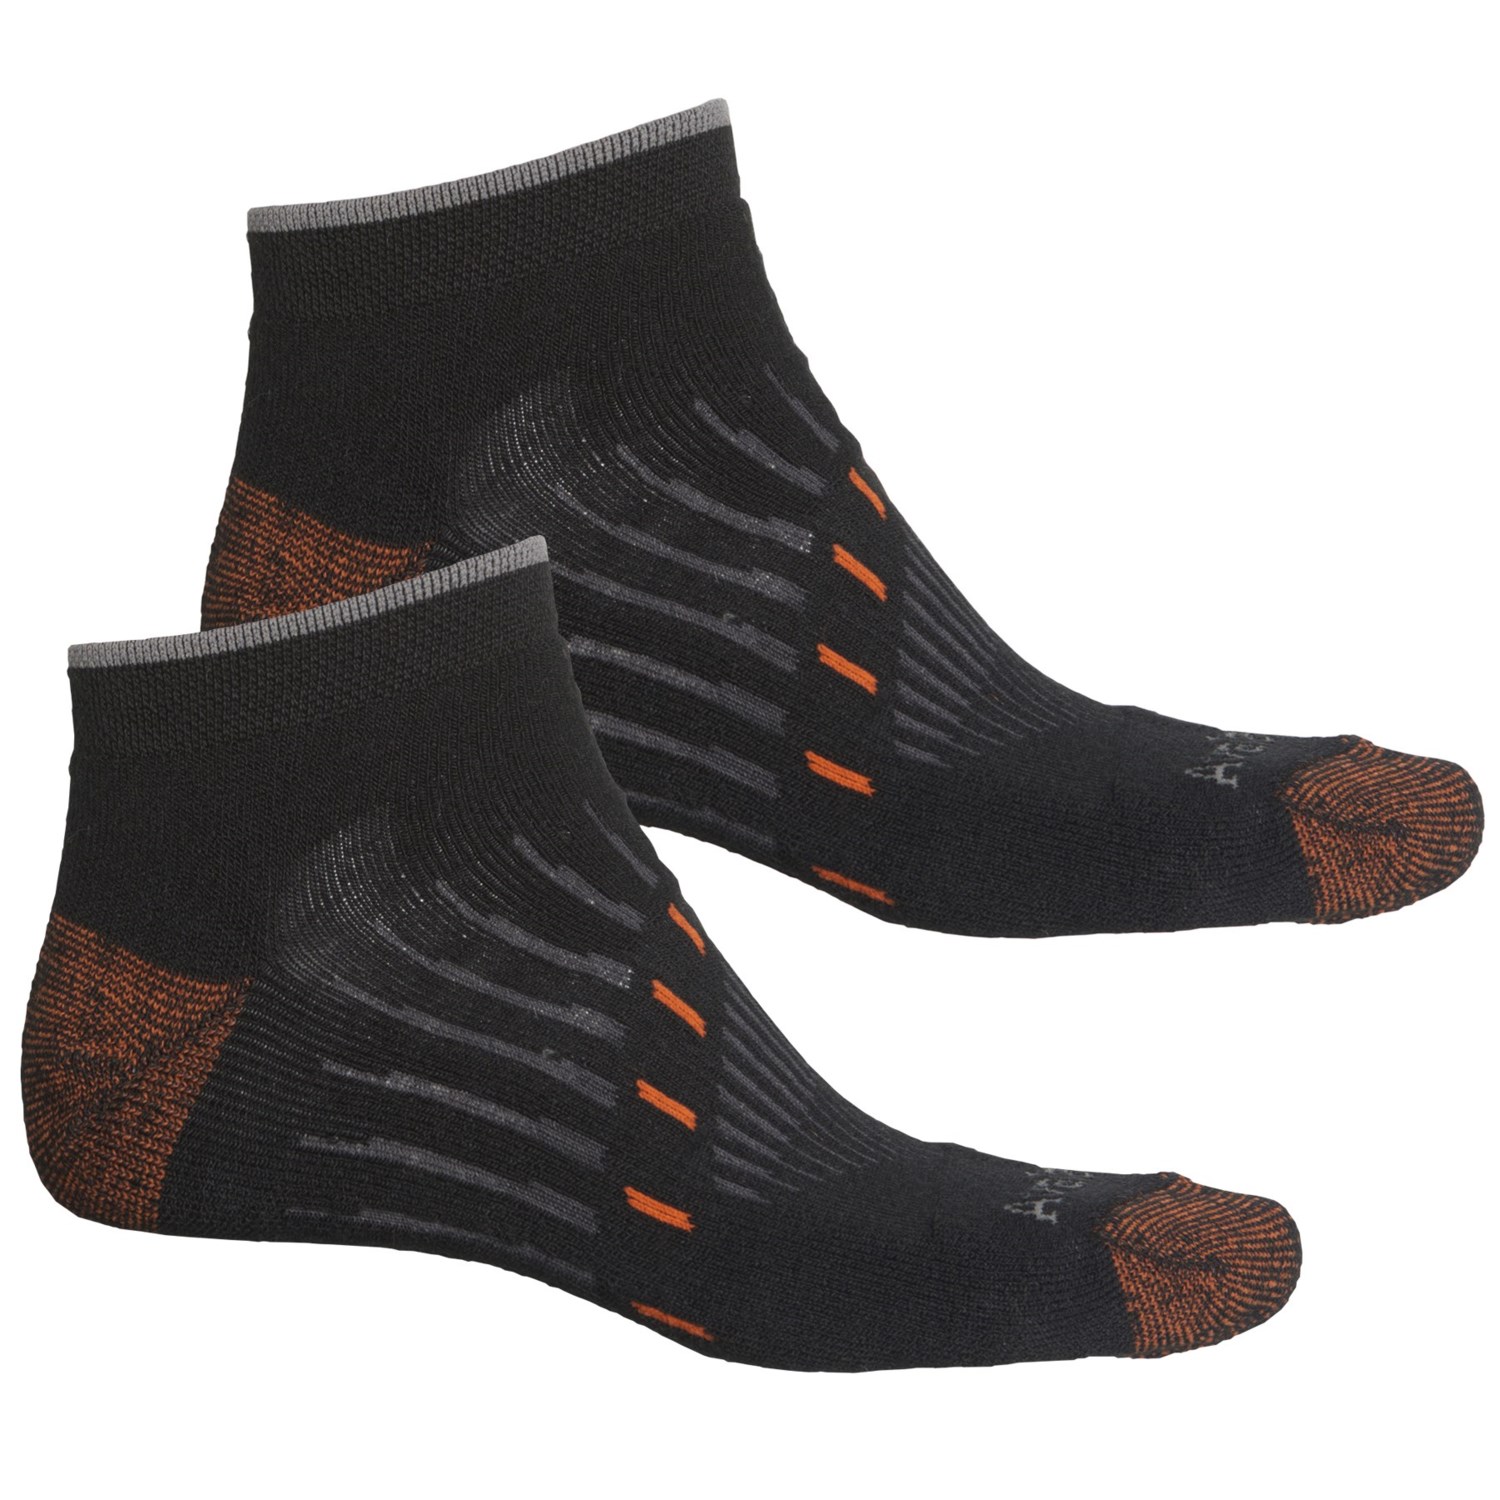 Avalanche Everyday High-Performance Low-Cut Socks (For Men)